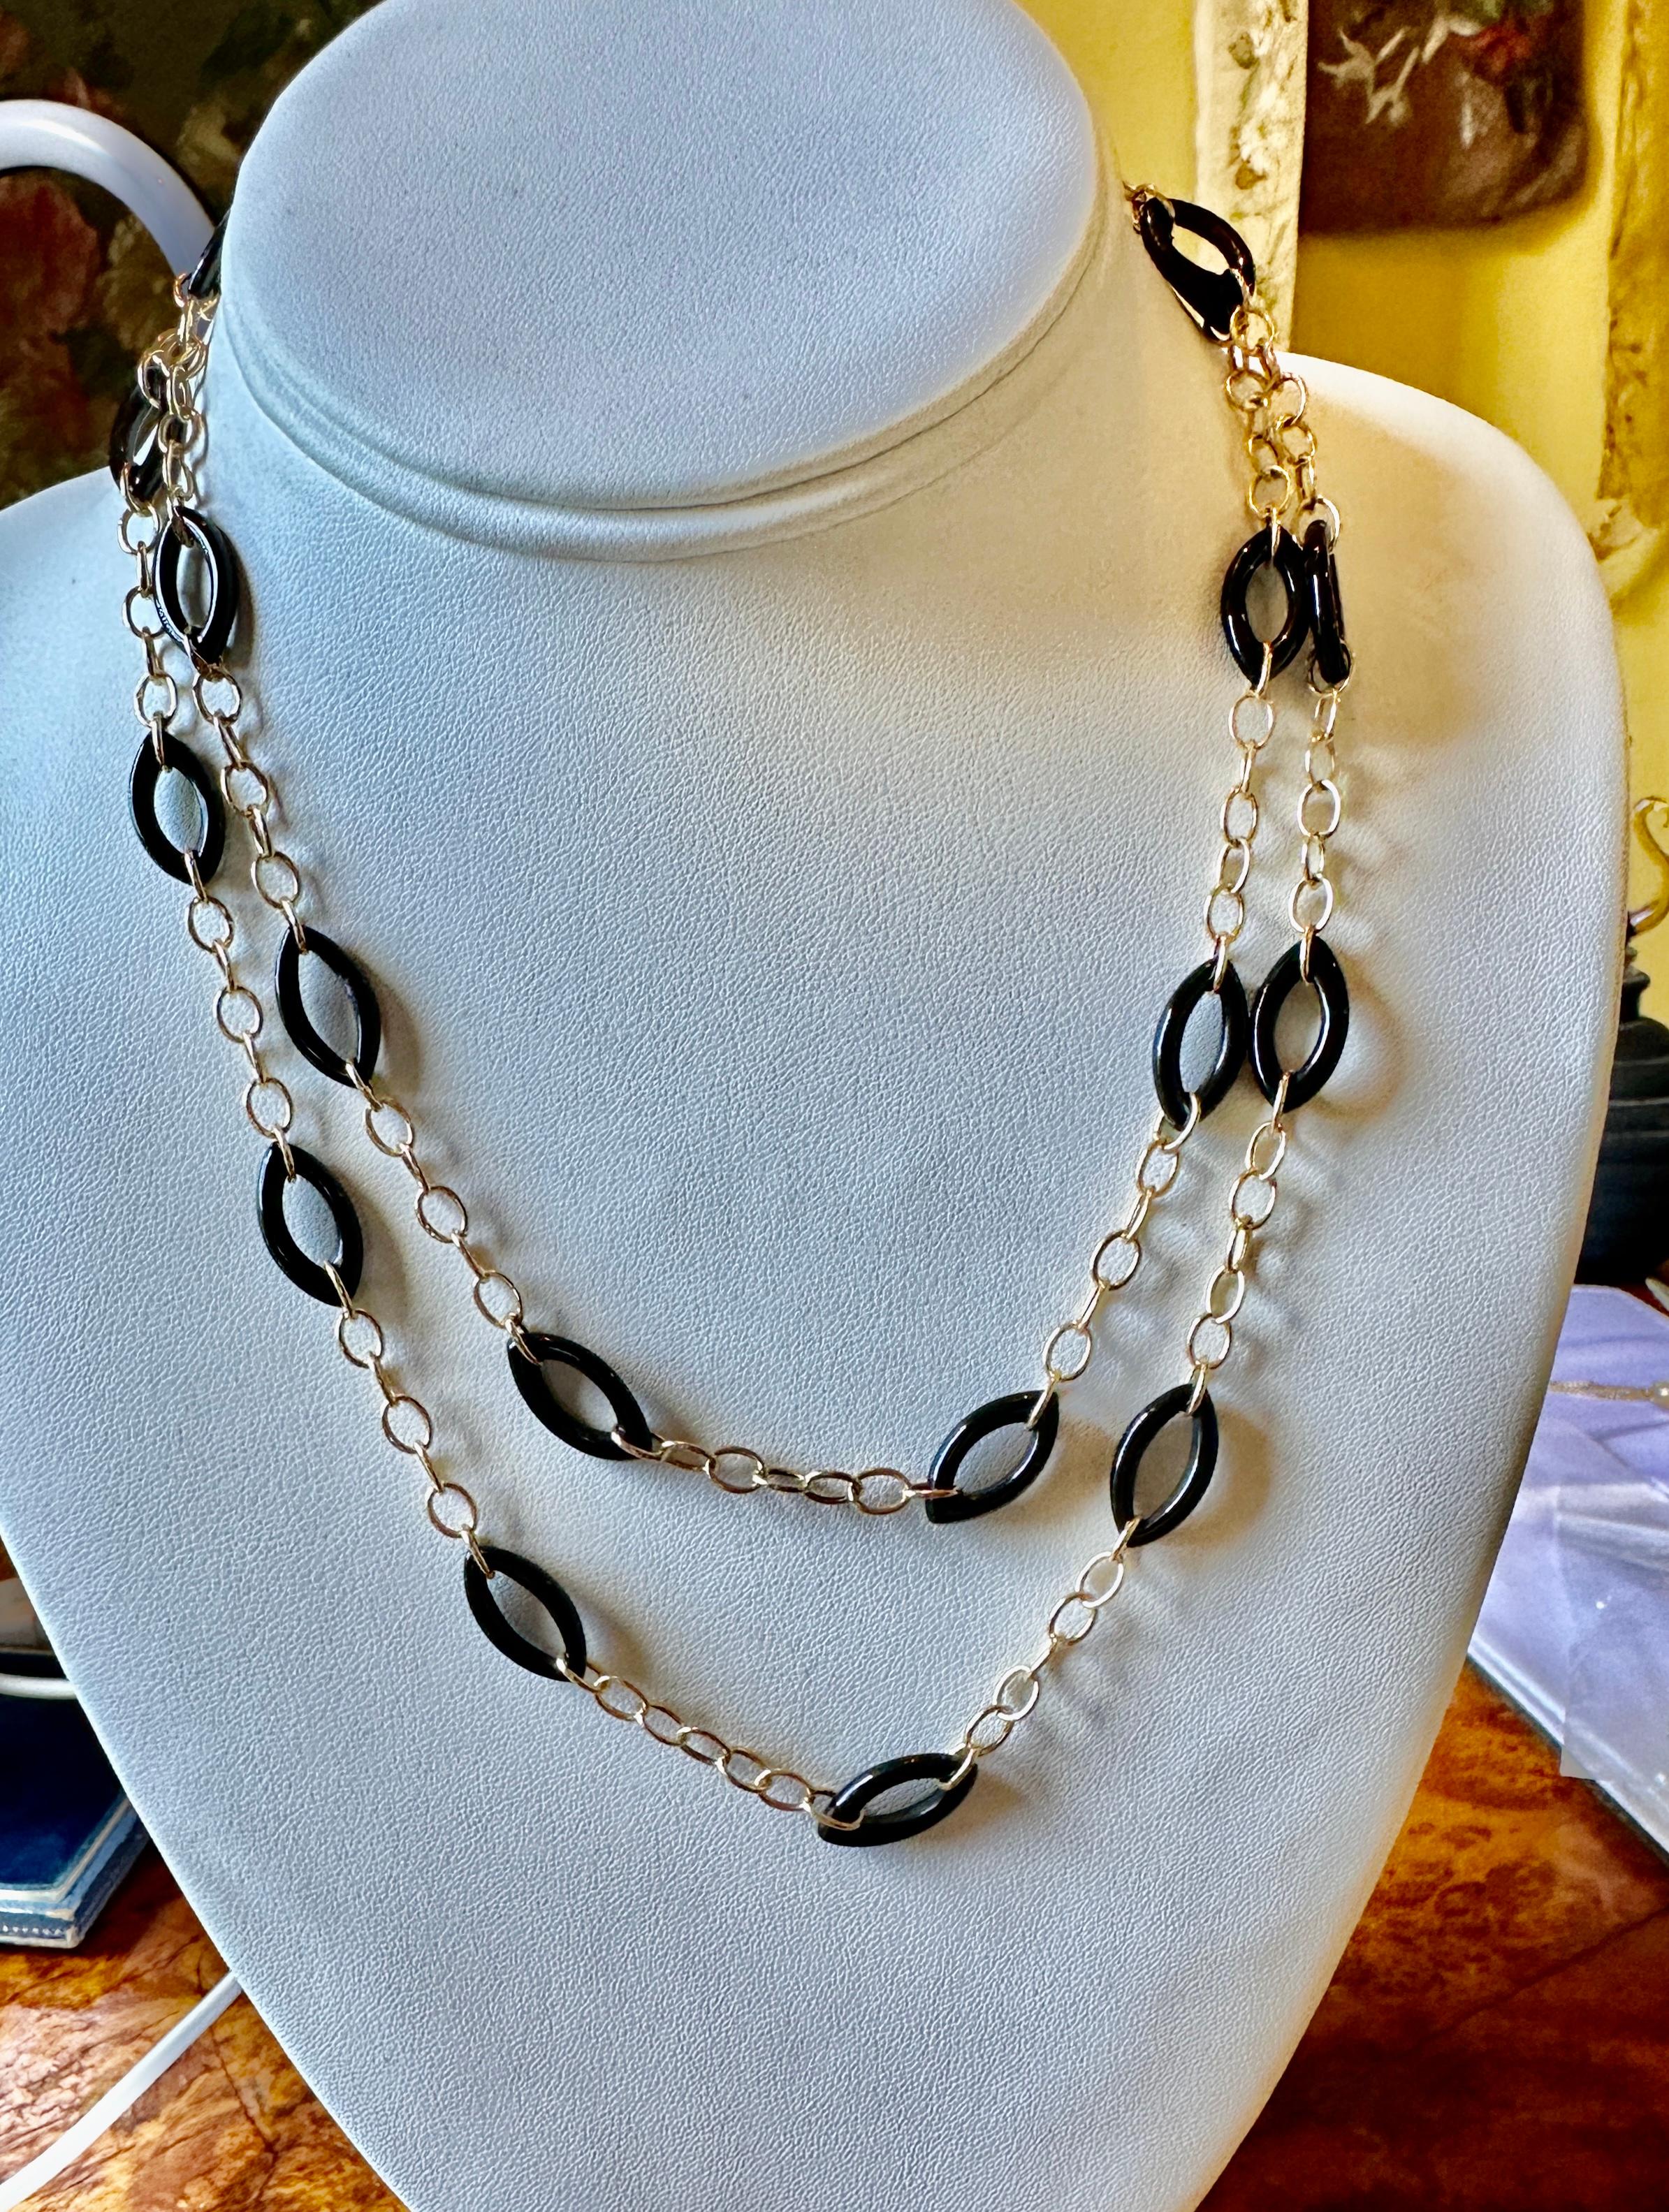 Marquise Cut Black Coral 14 Karat Gold Necklace 36 Inches Chain Link Necklace For Sale